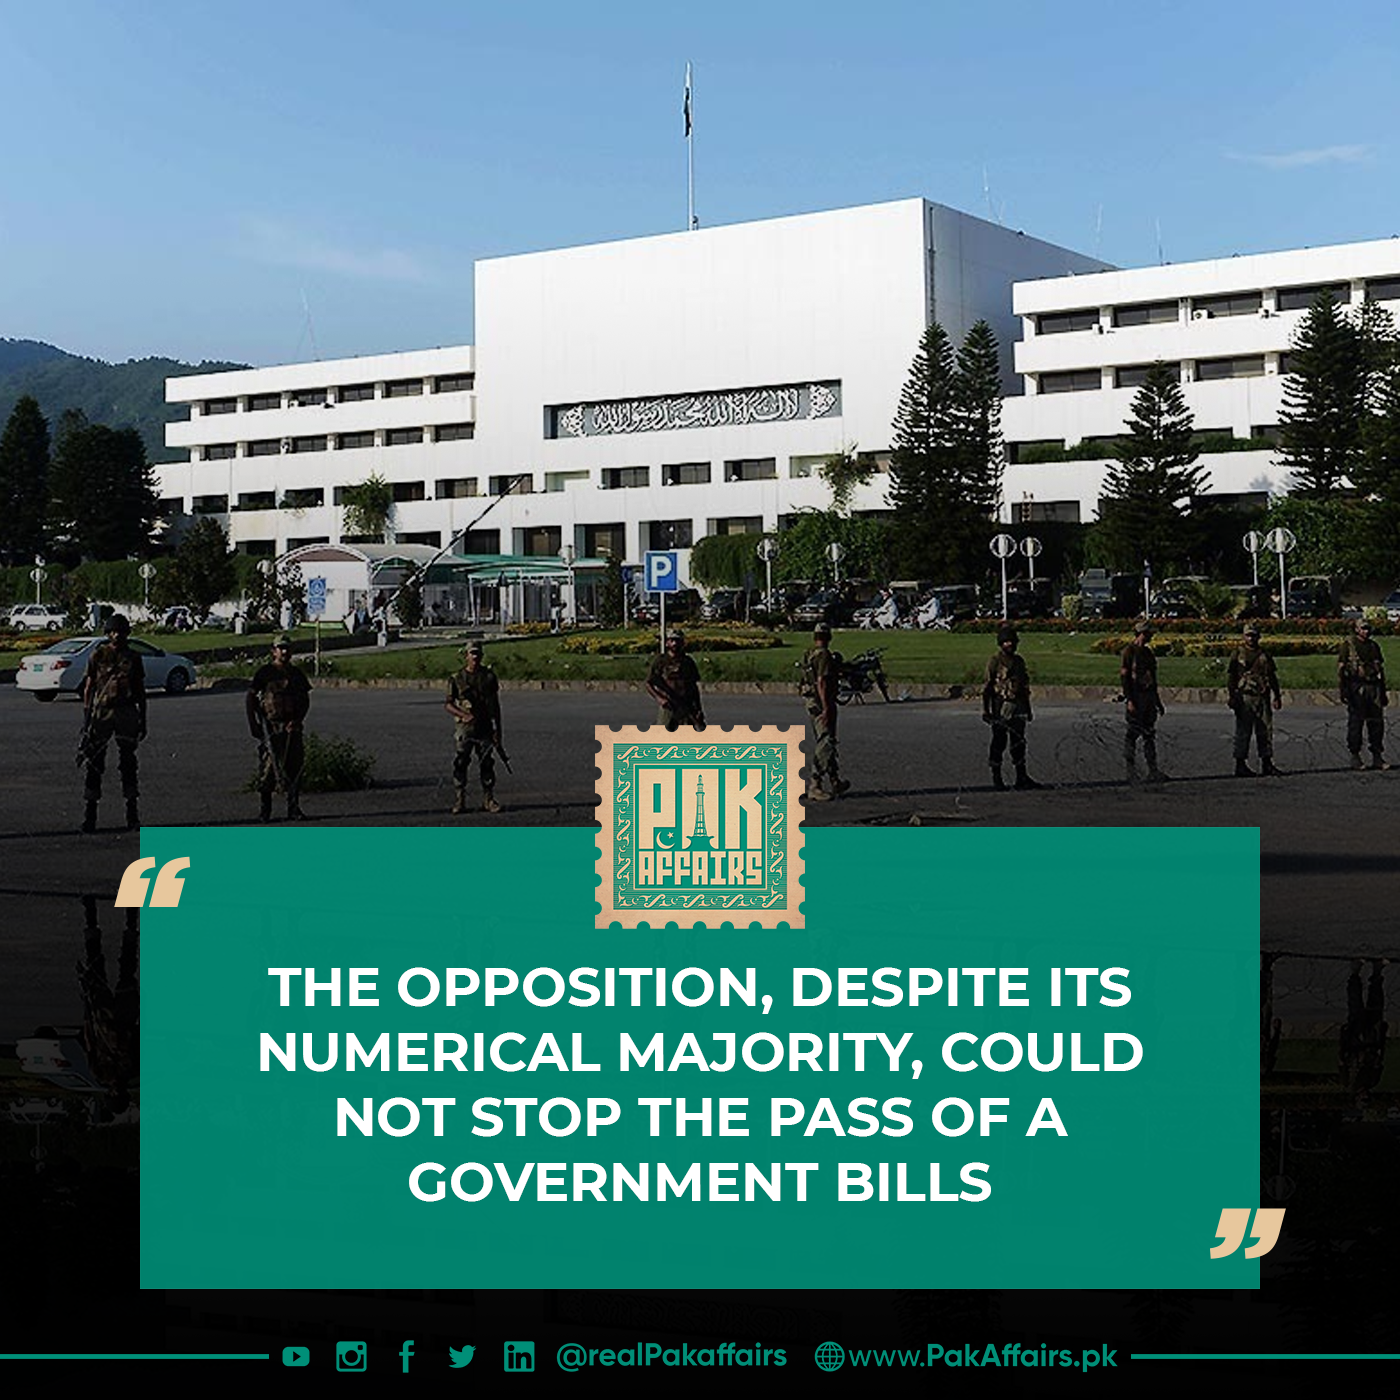 The Opposition, despite its numerical majority, could not stop the pass of a government bills